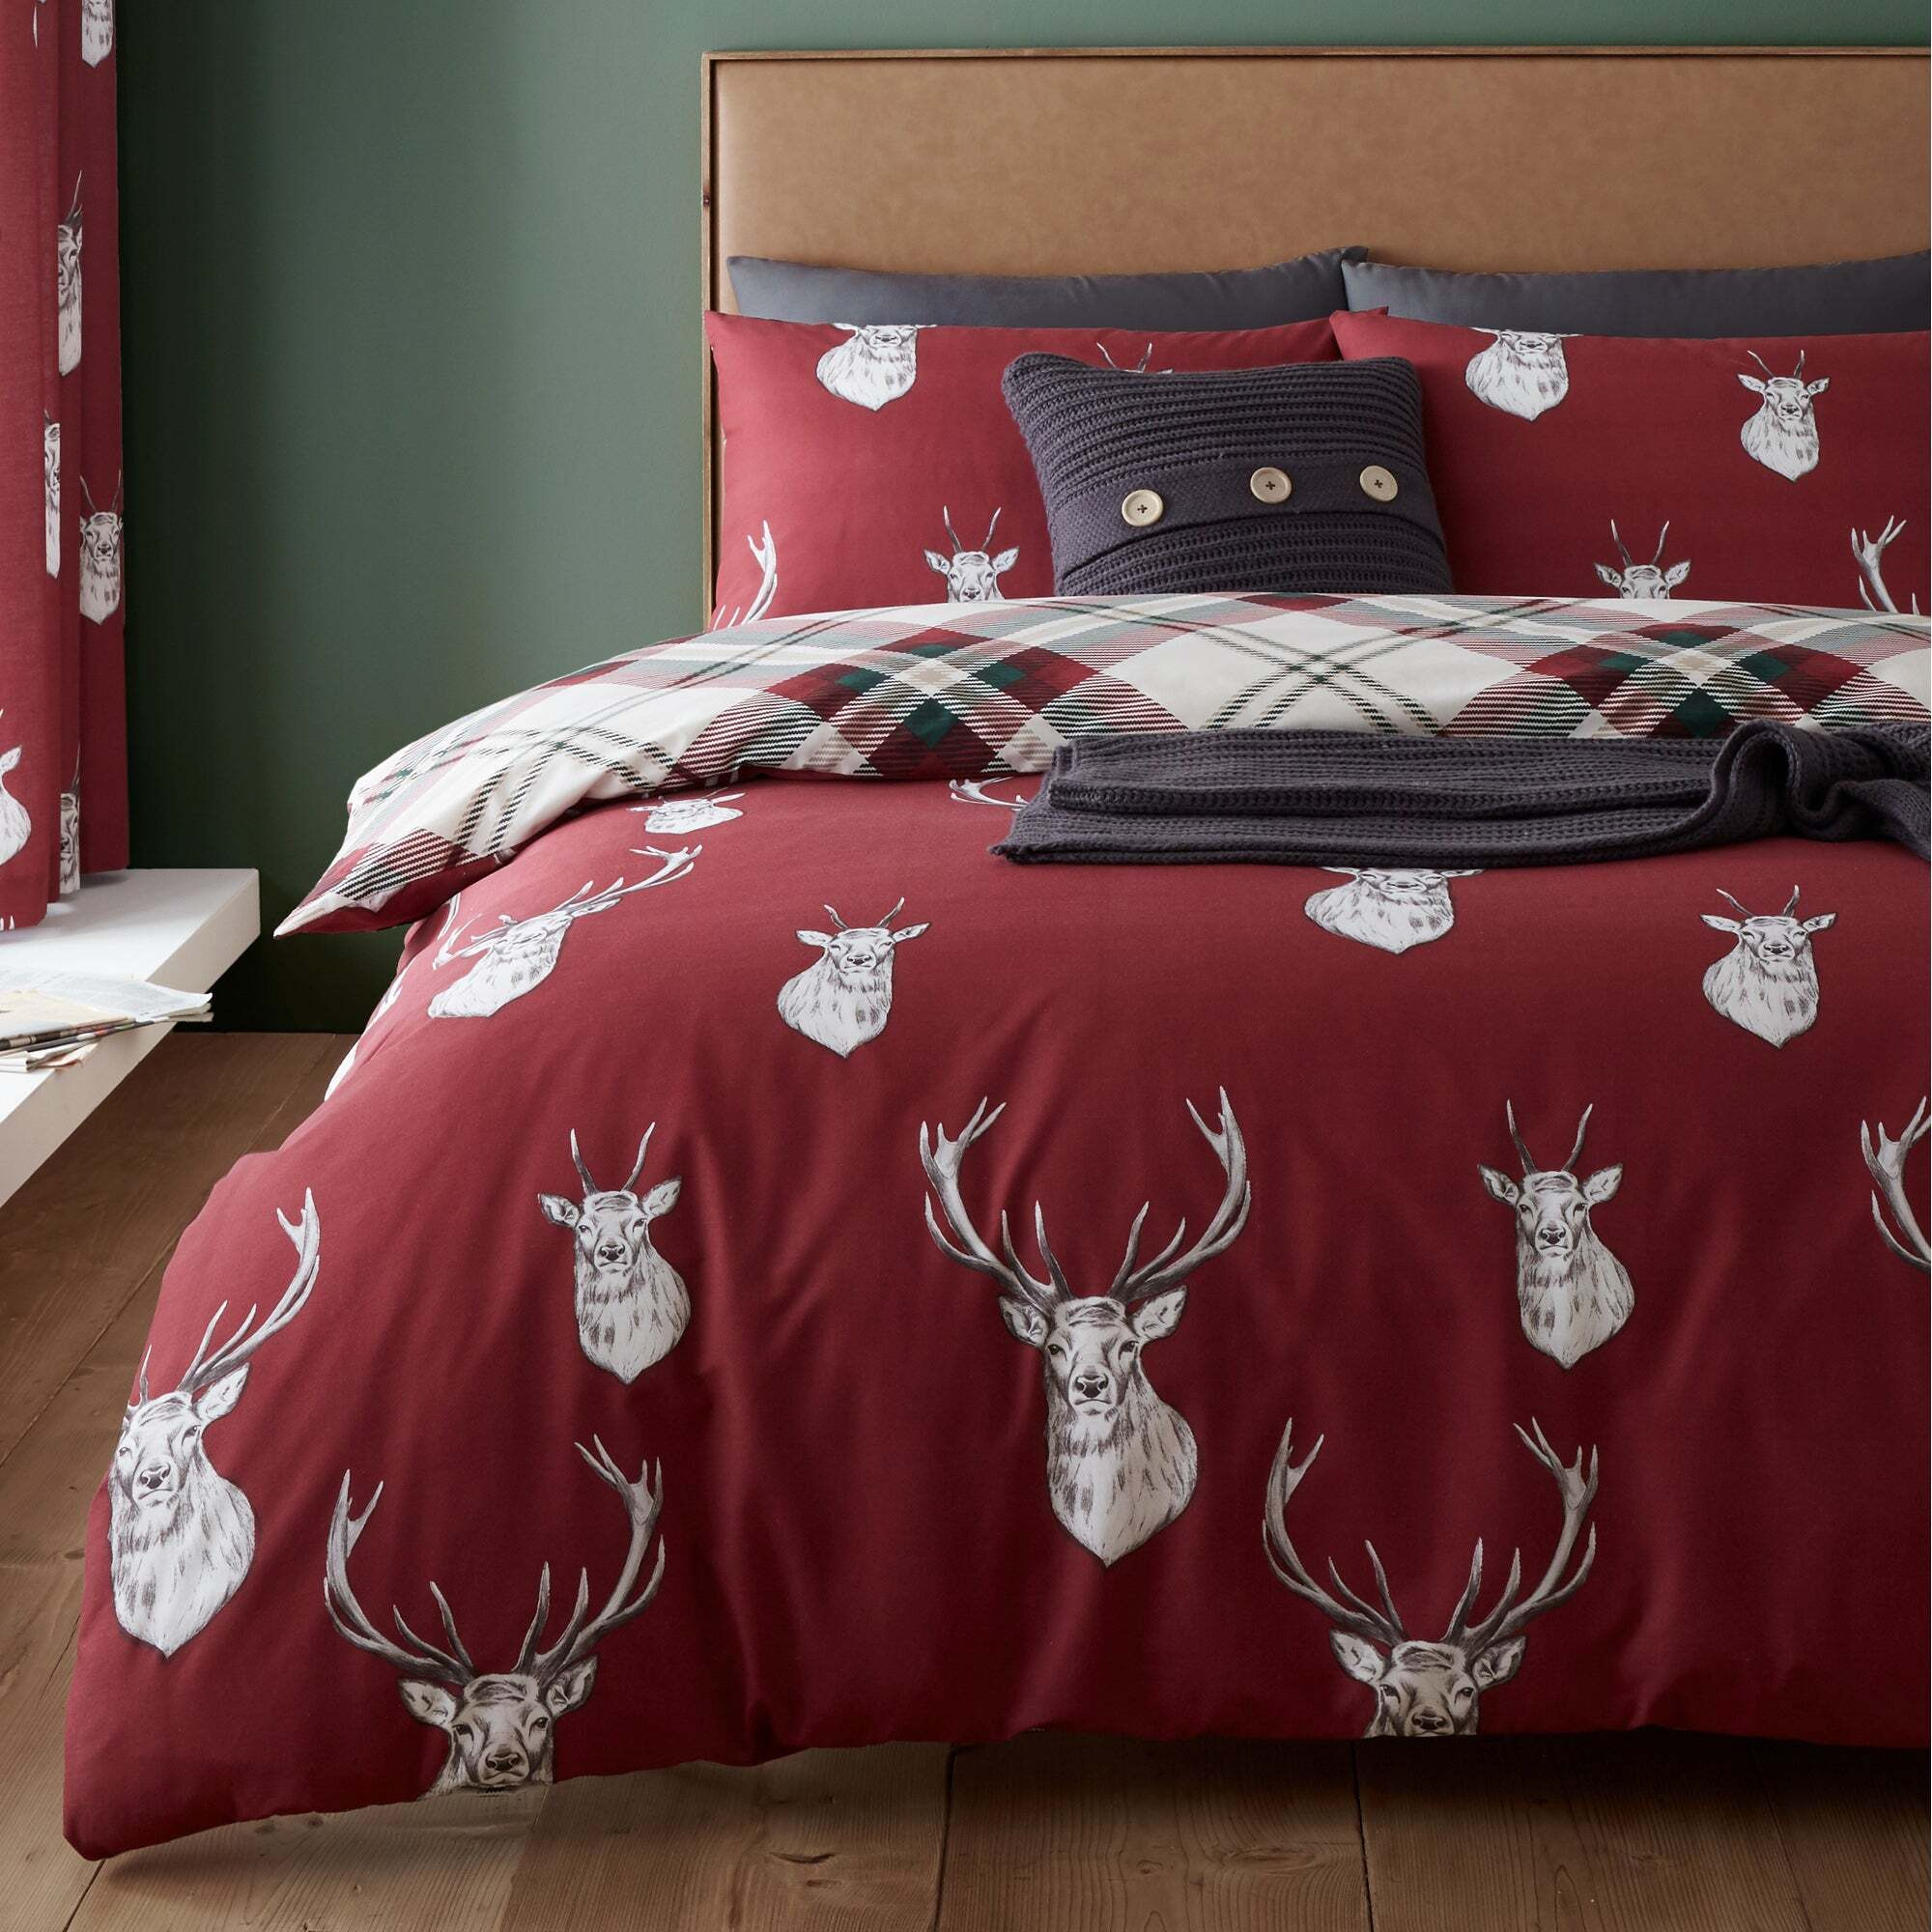 Munro Stag Reversible Duvet Cover and Pillowcase Set red